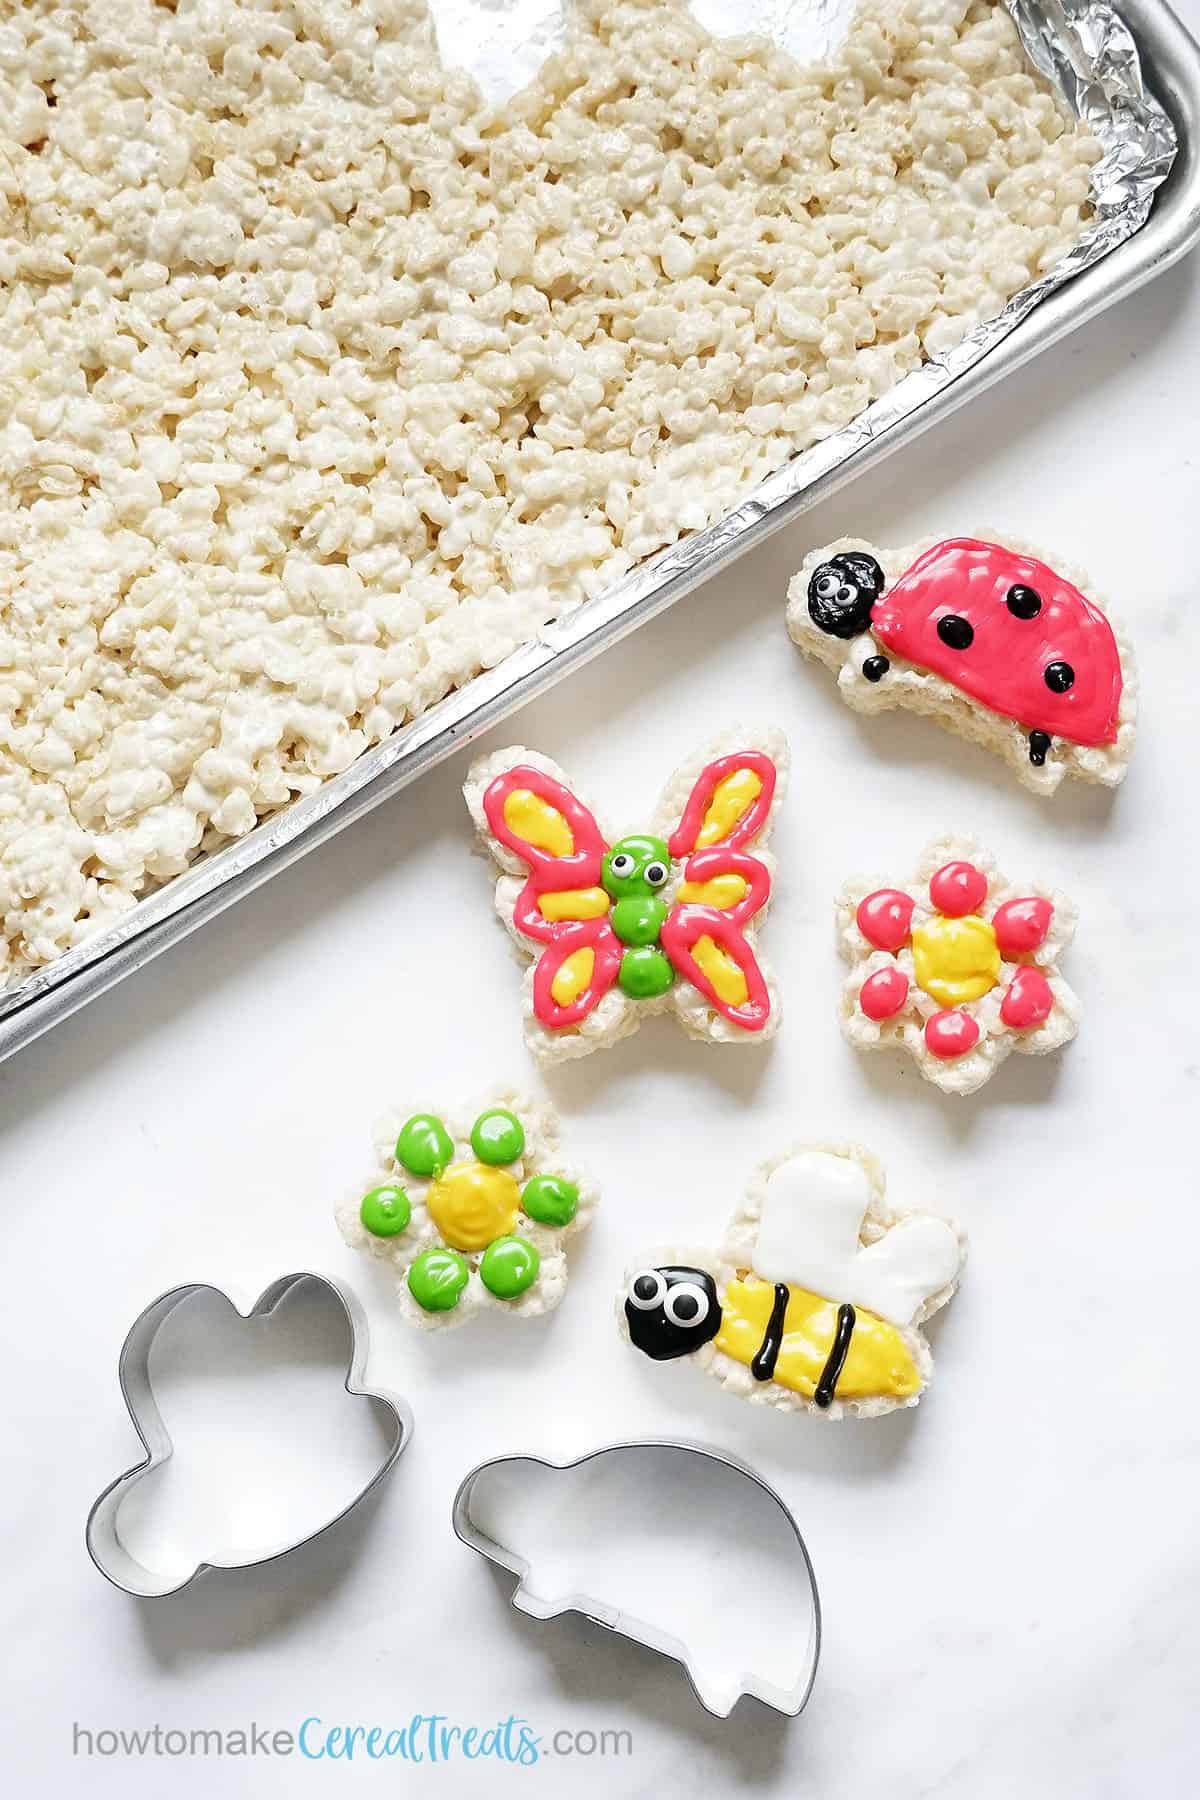 Sheet pan rice krispie treats with cut-out treats decorated with icing 